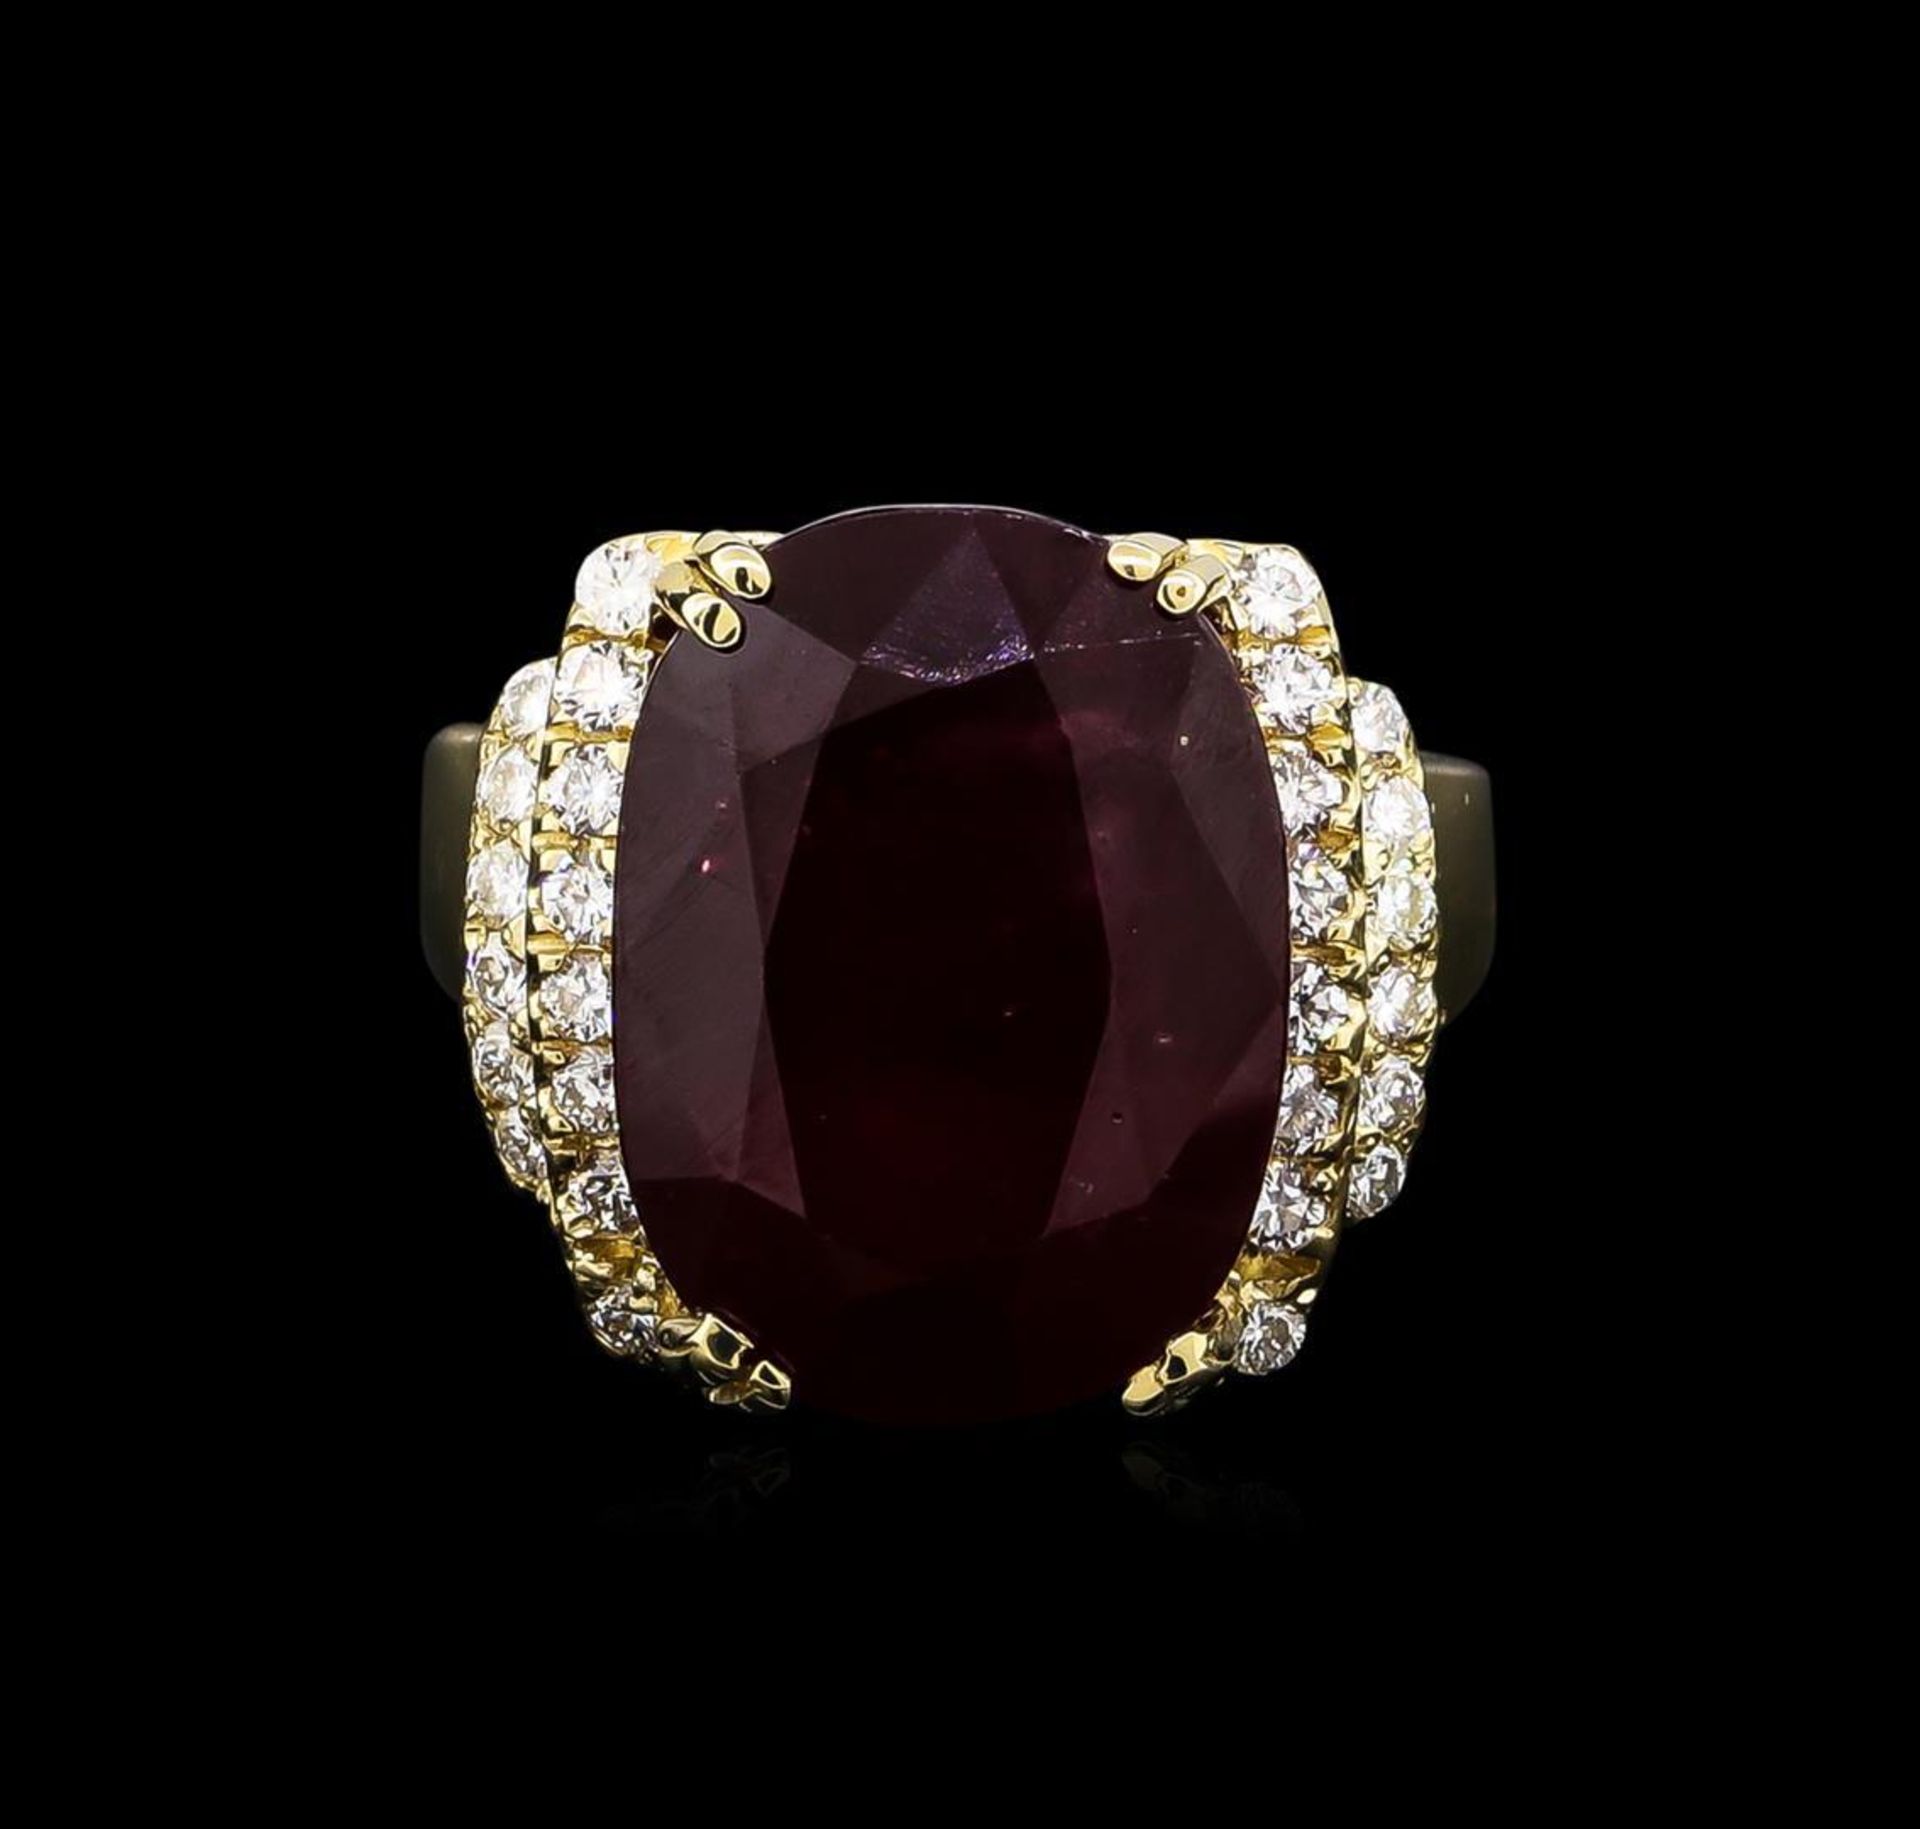 22.81 ctw Ruby and Diamond Ring - 14KT Yellow Gold - Image 2 of 4